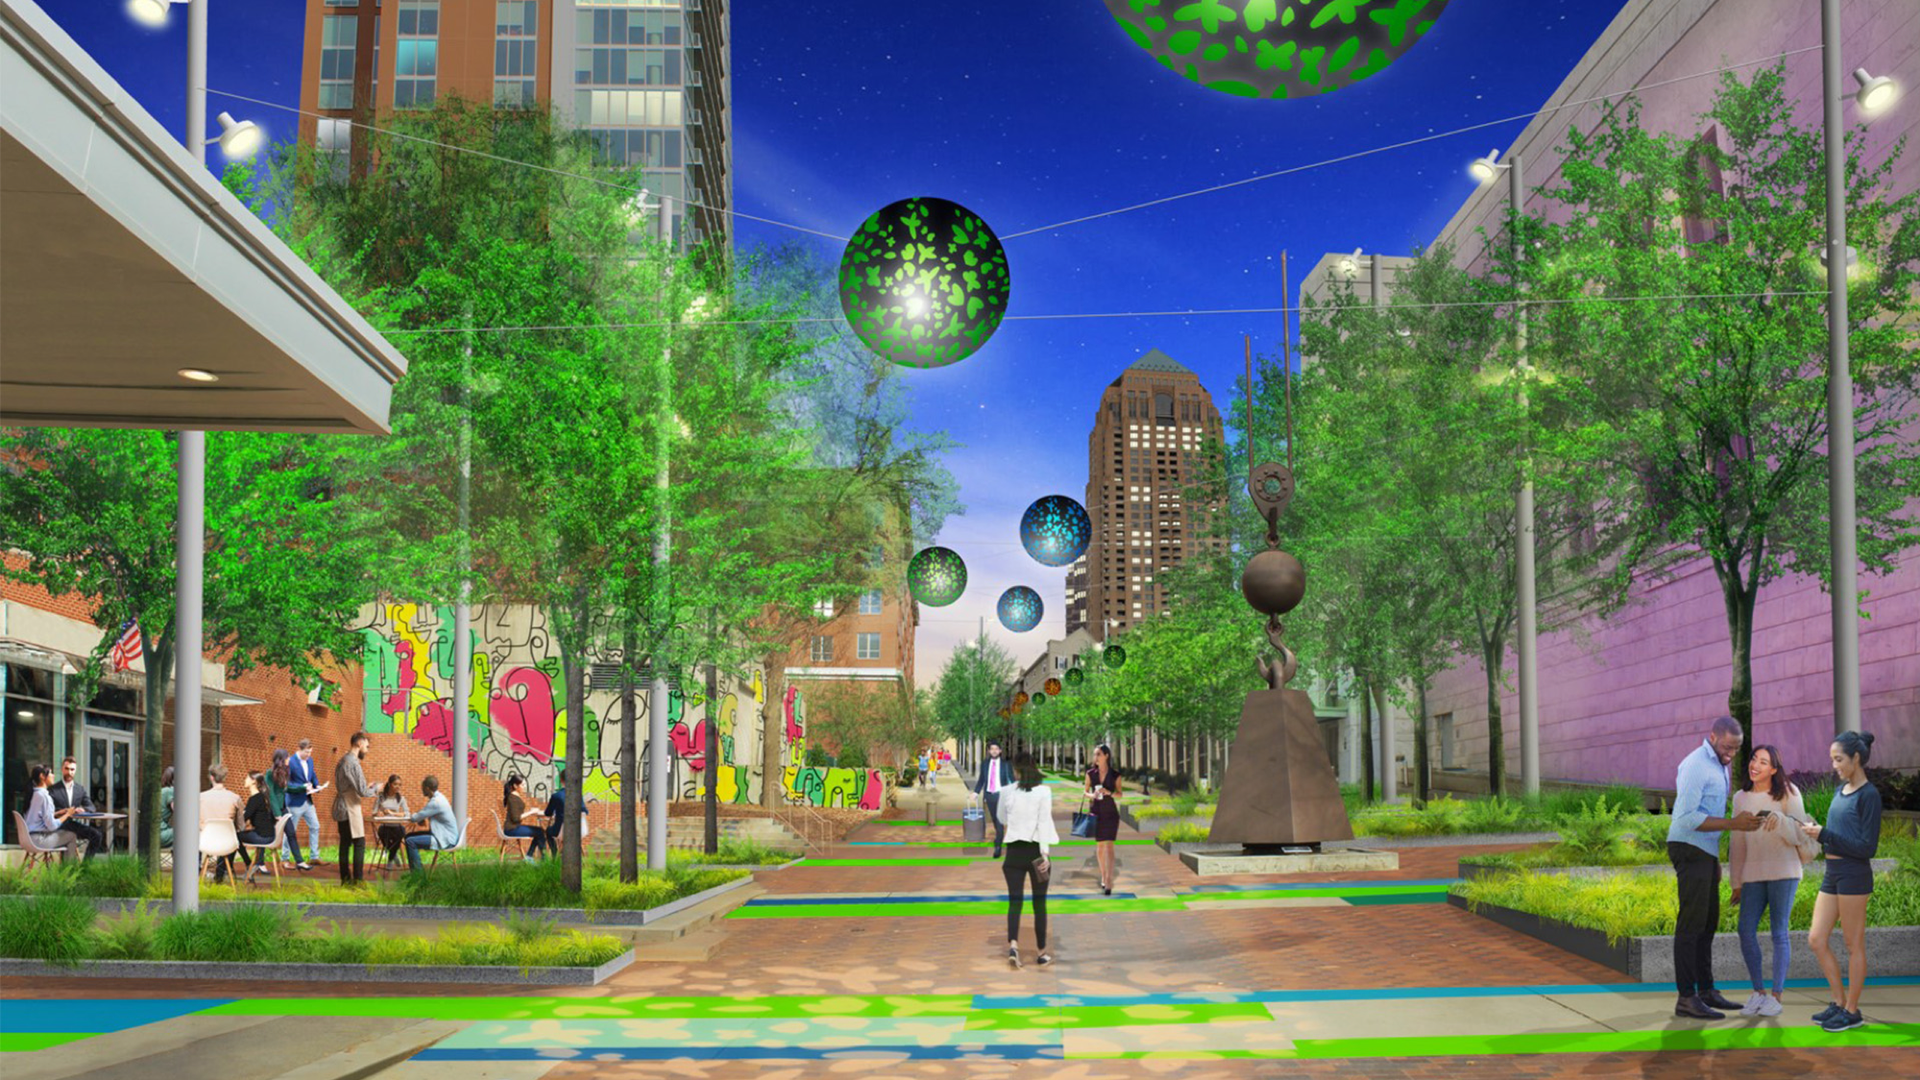 A rendering of a colorful promenade in an urban area with trees and green balls suspended over the walkway